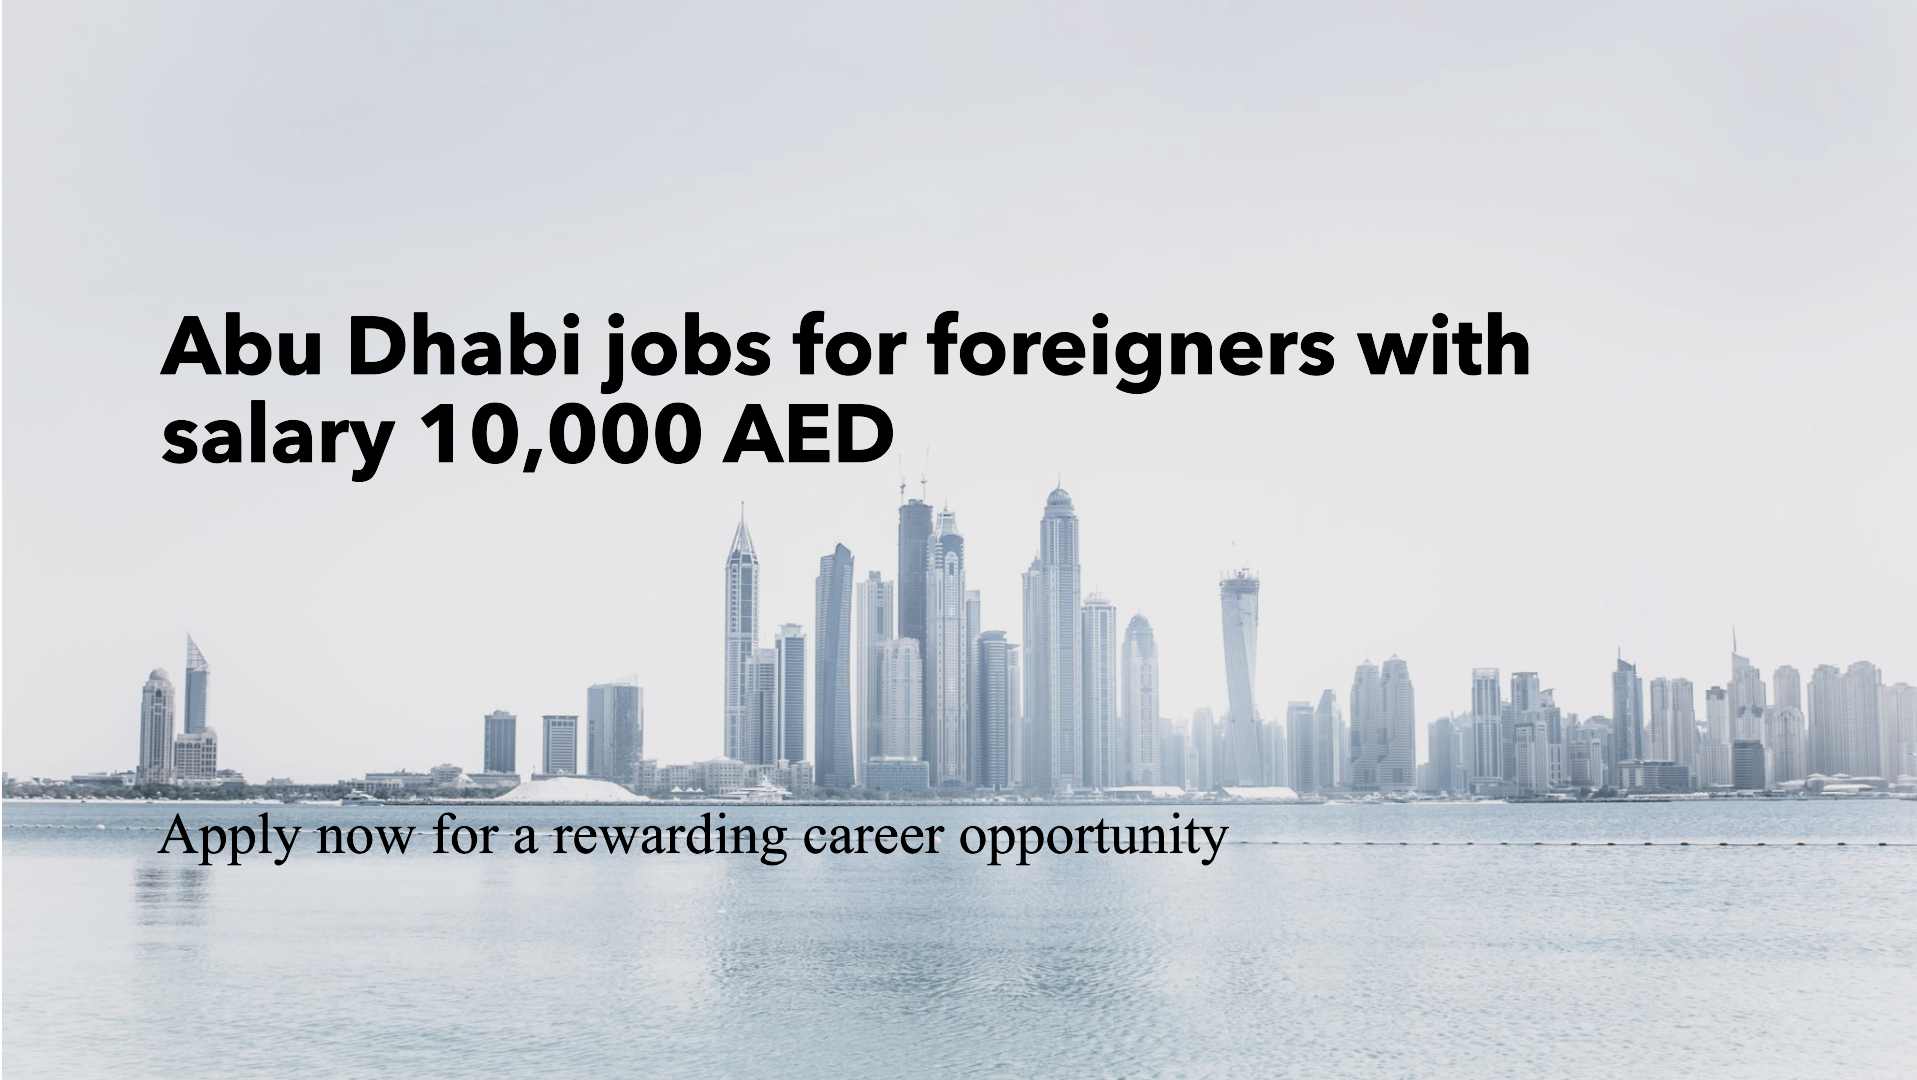 abu dhabi jobs for foreigners with salary 10,000 AED